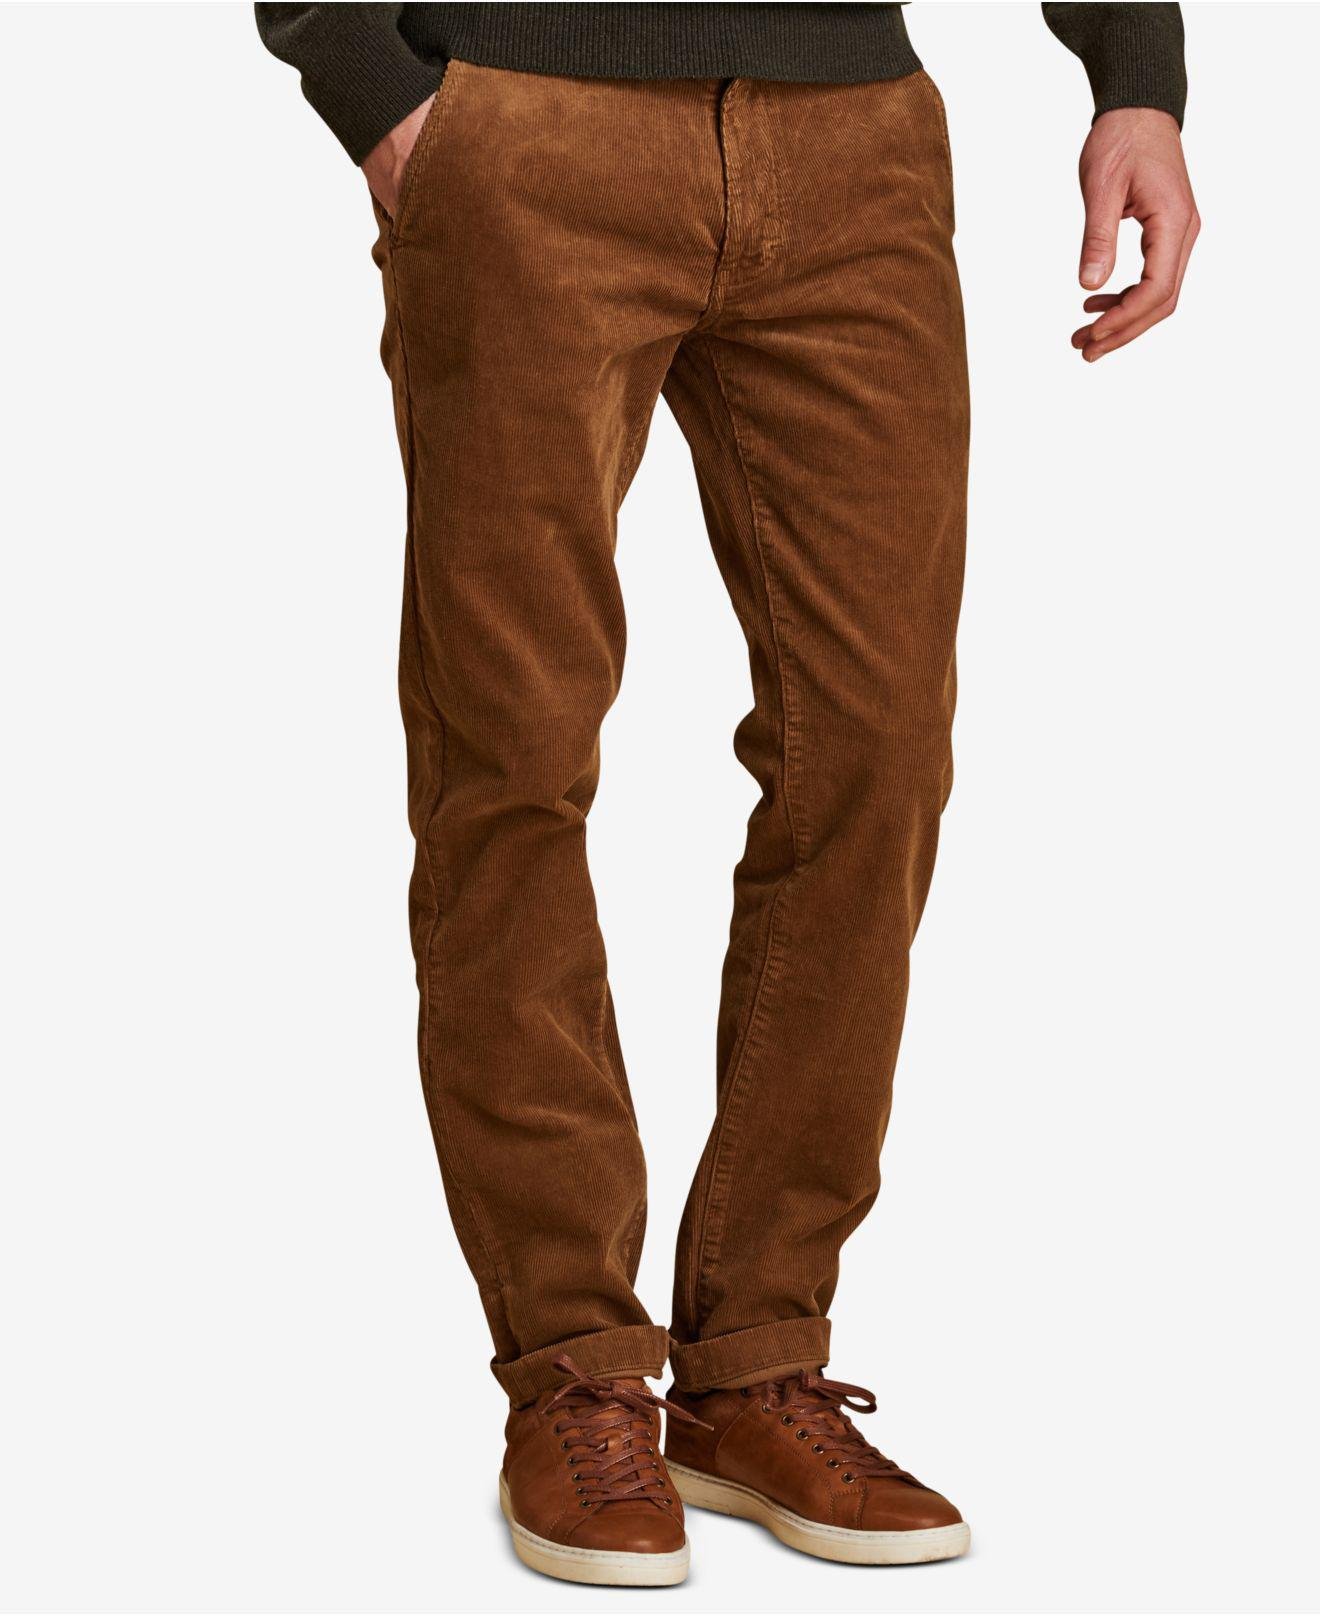 Lyst - Barbour Neuston Stretch Corduroy Pants in Brown for Men